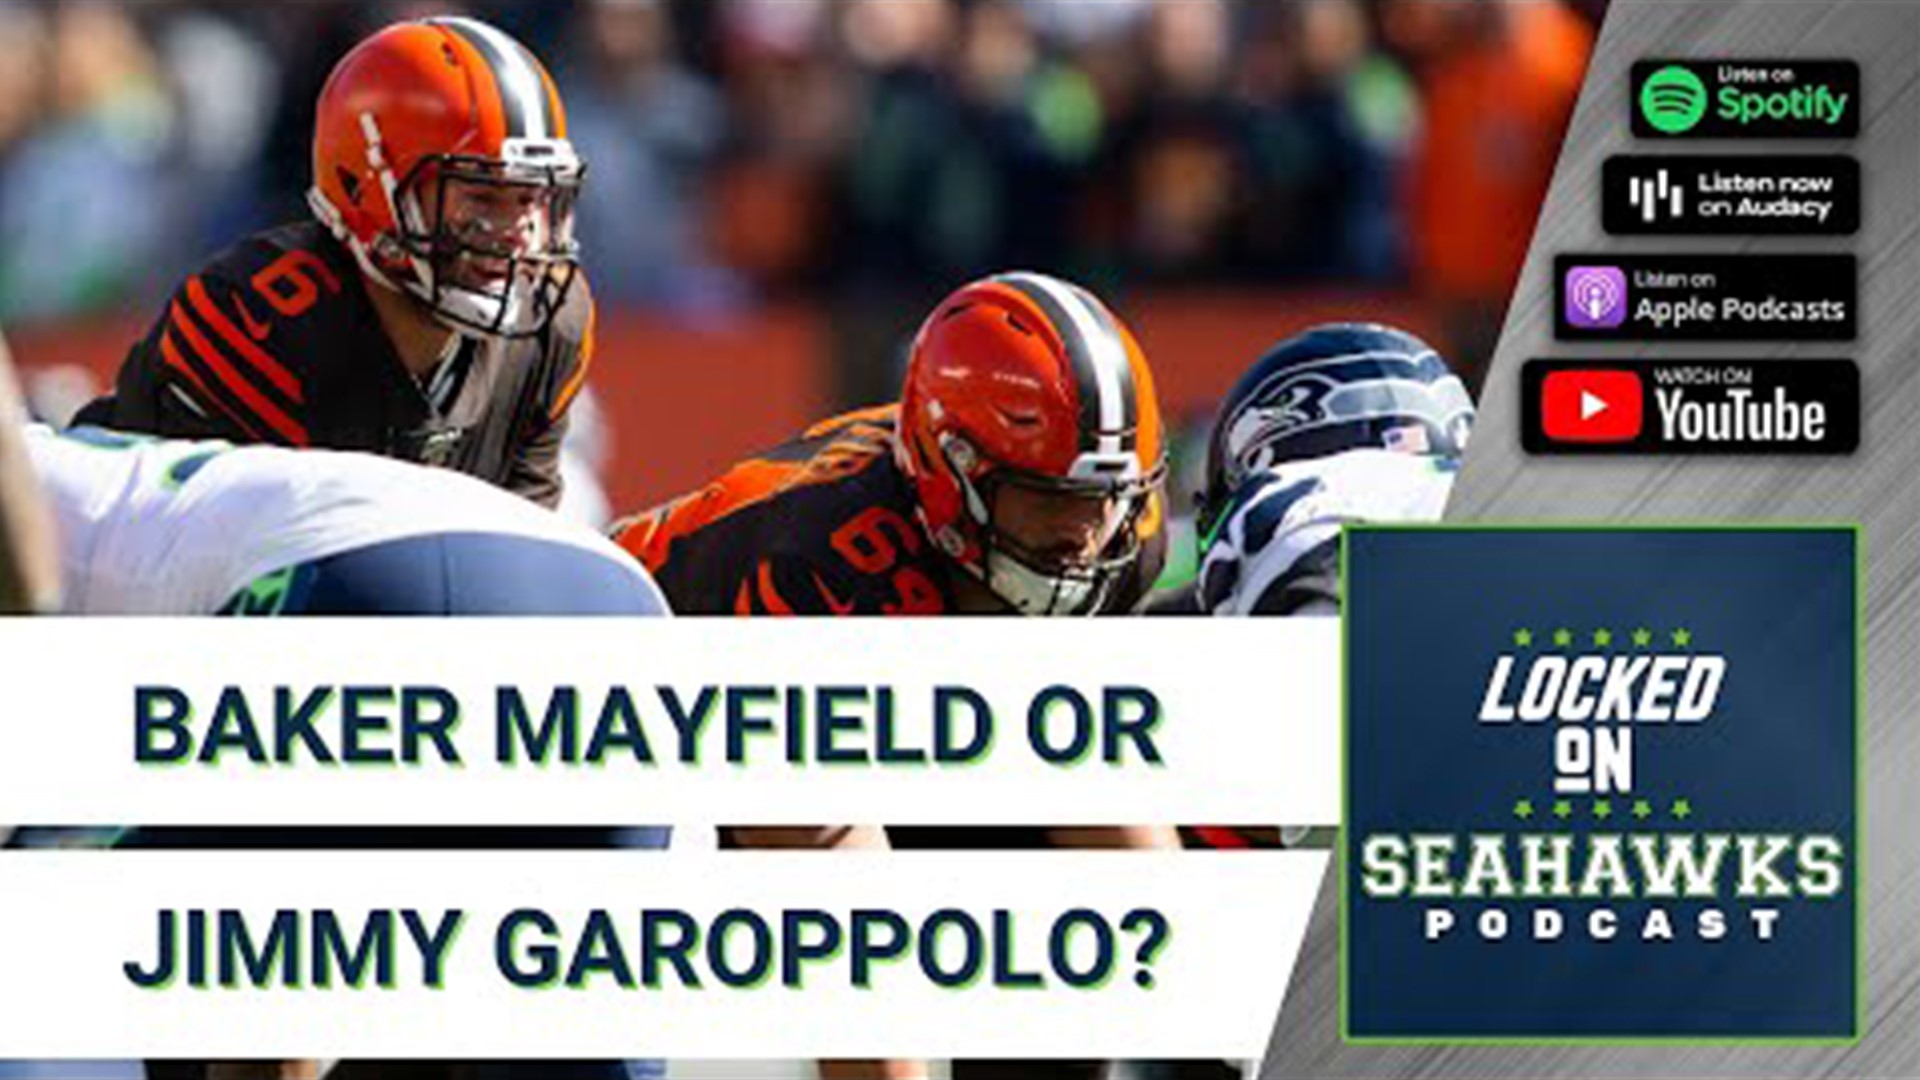 While Drew Lock and Geno Smith have engaged in an intense quarterback competition, the Seahawks continue to be linked to veterans Baker Mayfield and Jimmy Garoppolo